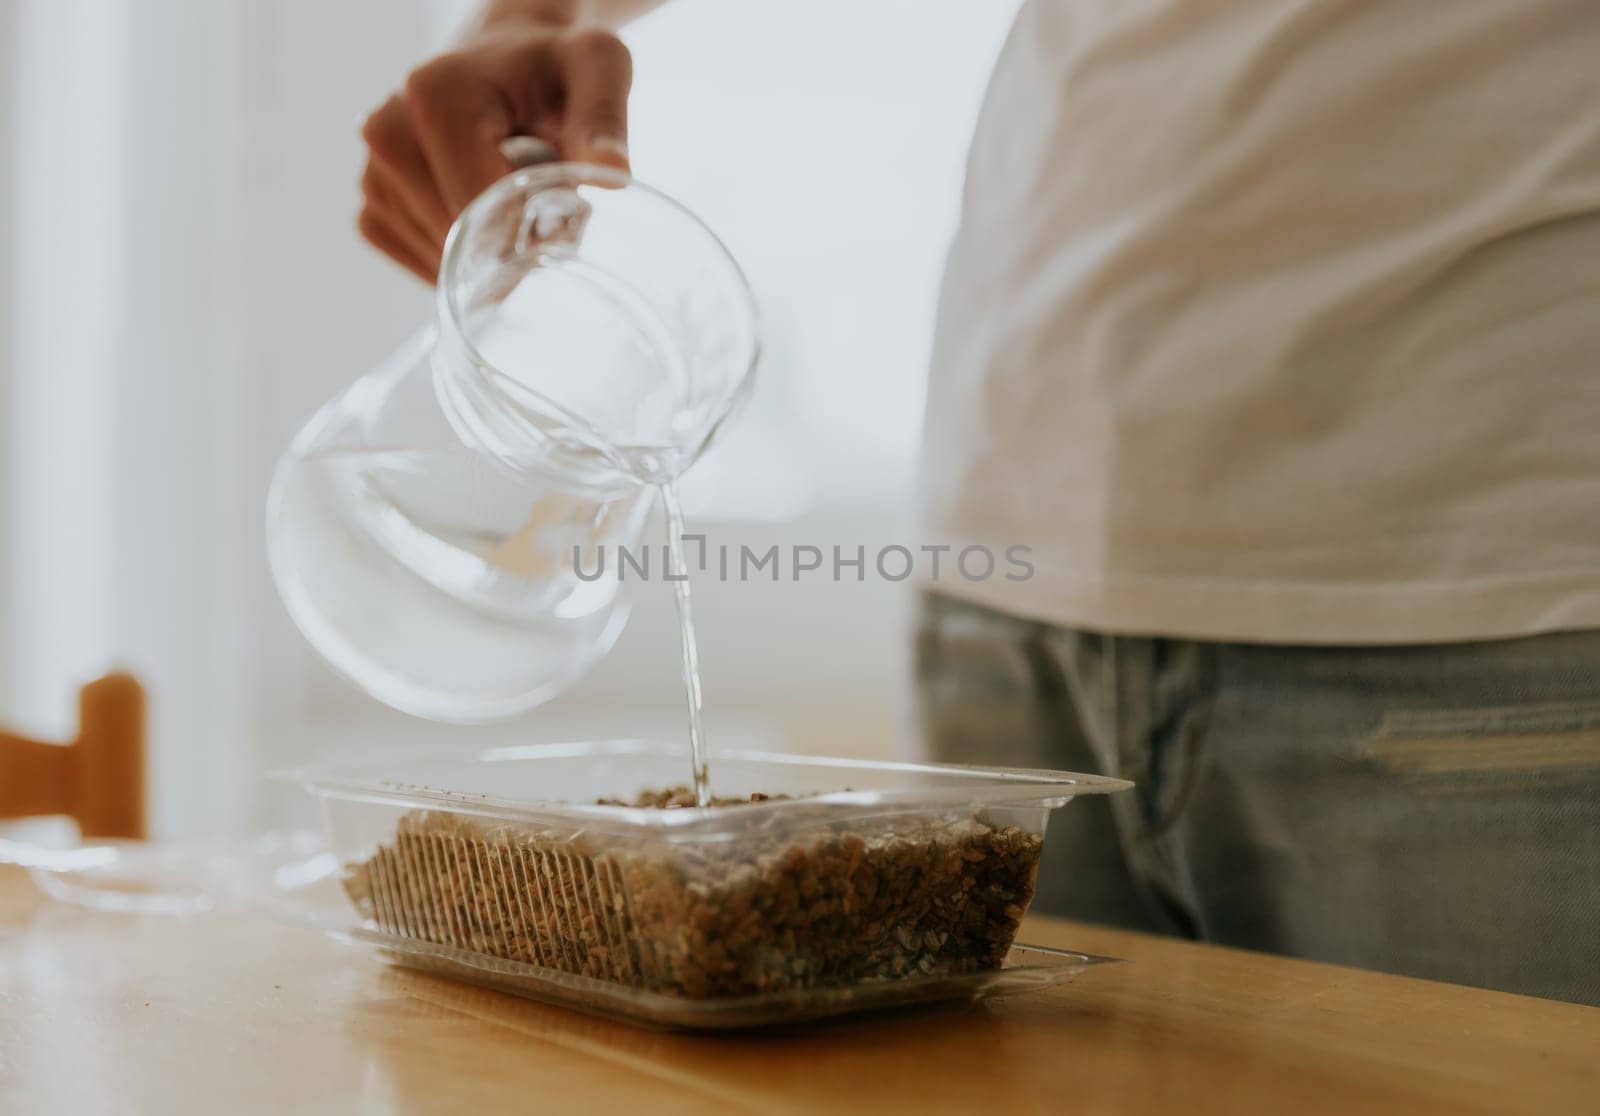 One young Caucasian unrecognizable man waters wheat seeds with soil into a container with one hand from a glass jug, standing in the kitchen at a wooden table, close-up side view.